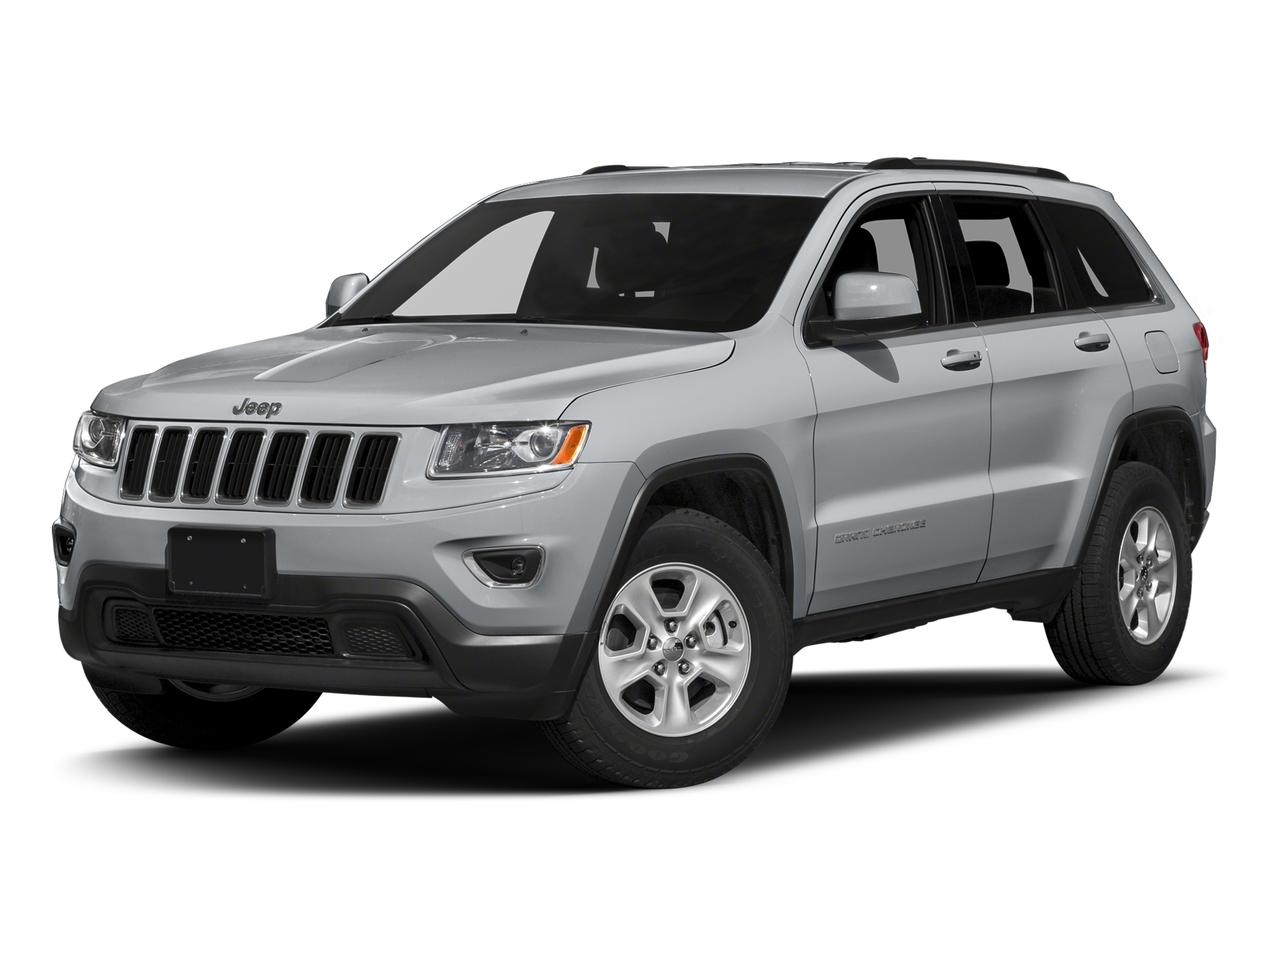 2016 Jeep Grand Cherokee Vehicle Photo in Plainfield, IL 60586